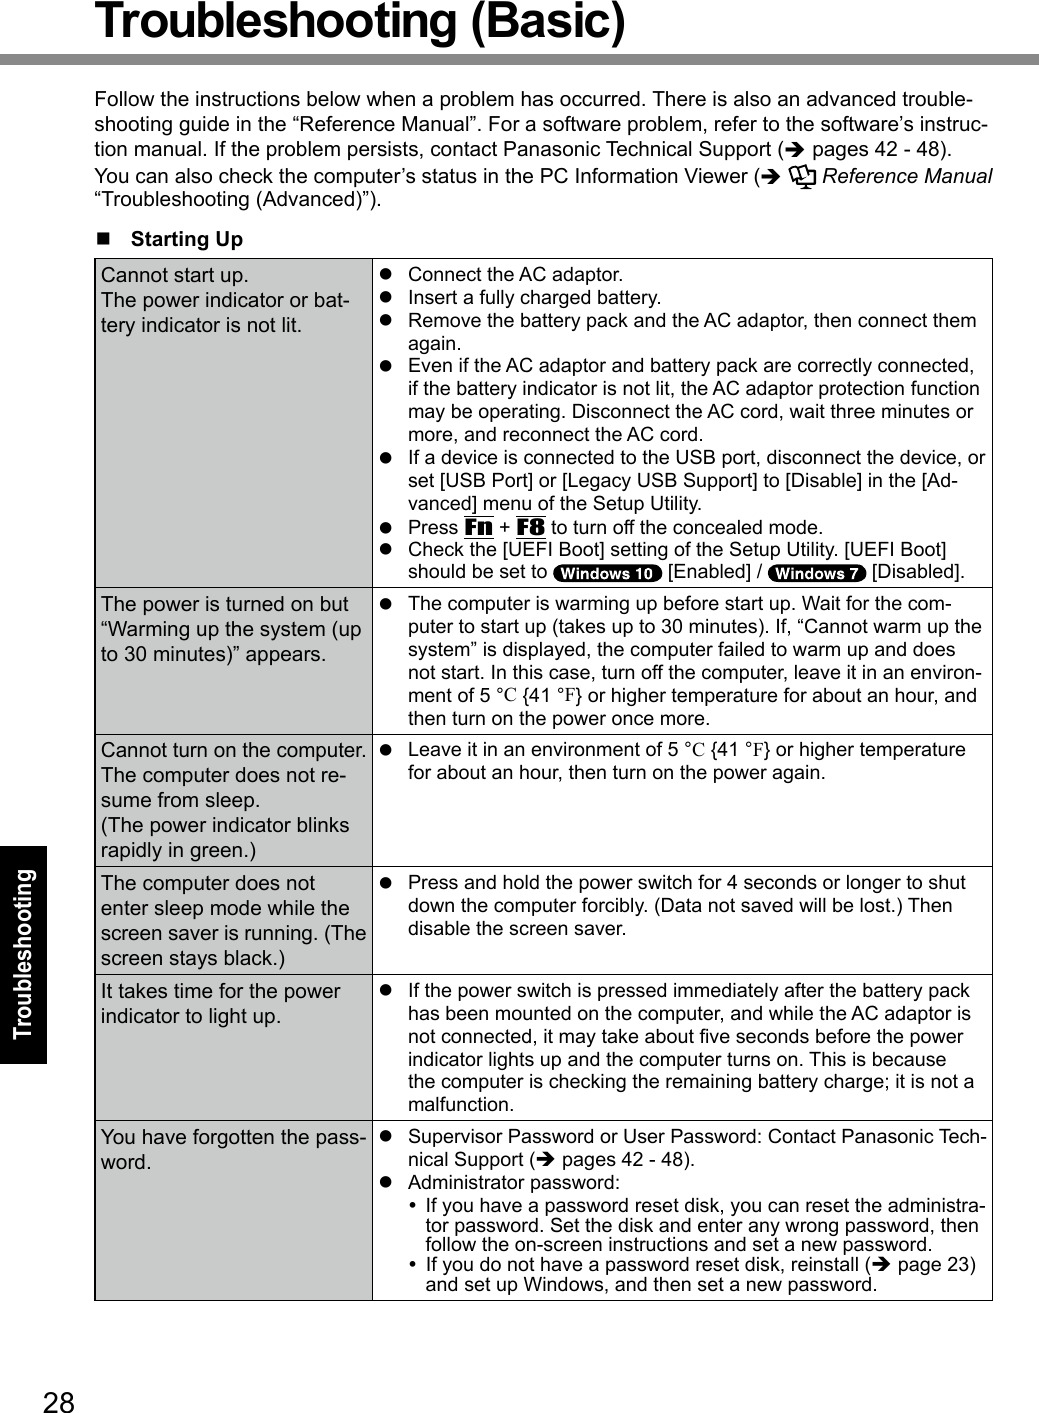 28TroubleshootingTroubleshooting (Basic)Follow the instructions below when a problem has occurred. There is also an advanced trouble-shooting guide in the “Reference Manual”. For a software problem, refer to the software’s instruc-tion manual. If the problem persists, contact Panasonic Technical Support (è pages 42 - 48). You can also check the computer’s status in the PC Information Viewer (è  Reference Manual “Troubleshooting (Advanced)”).n  Starting UpCannot start up.The power indicator or bat-tery indicator is not lit.l  Connect the AC adaptor.l  Insert a fully charged battery.l  Remove the battery pack and the AC adaptor, then connect them again. l  Even if the AC adaptor and battery pack are correctly connected, if the battery indicator is not lit, the AC adaptor protection function may be operating. Disconnect the AC cord, wait three minutes or more, and reconnect the AC cord.l  If a device is connected to the USB port, disconnect the device, or set [USB Port] or [Legacy USB Support] to [Disable] in the [Ad-vanced] menu of the Setup Utility.l Press Fn + F8 to turn off the concealed mode.l  Check the [UEFI Boot] setting of the Setup Utility. [UEFI Boot] should be set to   [Enabled] /   [Disabled].The power is turned on but “Warming up the system (up to 30 minutes)” appears.l  The computer is warming up before start up. Wait for the com-puter to start up (takes up to 30 minutes). If, “Cannot warm up the system” is displayed, the computer failed to warm up and does not start. In this case, turn off the computer, leave it in an environ-ment of 5 °C {41 °F} or higher temperature for about an hour, and then turn on the power once more.Cannot turn on the computer.The computer does not re-sume from sleep.(The power indicator blinks rapidly in green.)l  Leave it in an environment of 5 °C {41 °F} or higher temperature for about an hour, then turn on the power again.The computer does not enter sleep mode while the screen saver is running. (The screen stays black.)l  Press and hold the power switch for 4 seconds or longer to shut down the computer forcibly. (Data not saved will be lost.) Then disable the screen saver.It takes time for the power indicator to light up.l  If the power switch is pressed immediately after the battery pack has been mounted on the computer, and while the AC adaptor is notconnected,itmaytakeaboutvesecondsbeforethepowerindicator lights up and the computer turns on. This is because the computer is checking the remaining battery charge; it is not a malfunction.You have forgotten the pass-word.l  Supervisor Password or User Password: Contact Panasonic Tech-nical Support (è pages 42 - 48).l  Administrator password:   If you have a password reset disk, you can reset the administra-tor password. Set the disk and enter any wrong password, then follow the on-screen instructions and set a new password.  If you do not have a password reset disk, reinstall (è page 23) and set up Windows, and then set a new password.